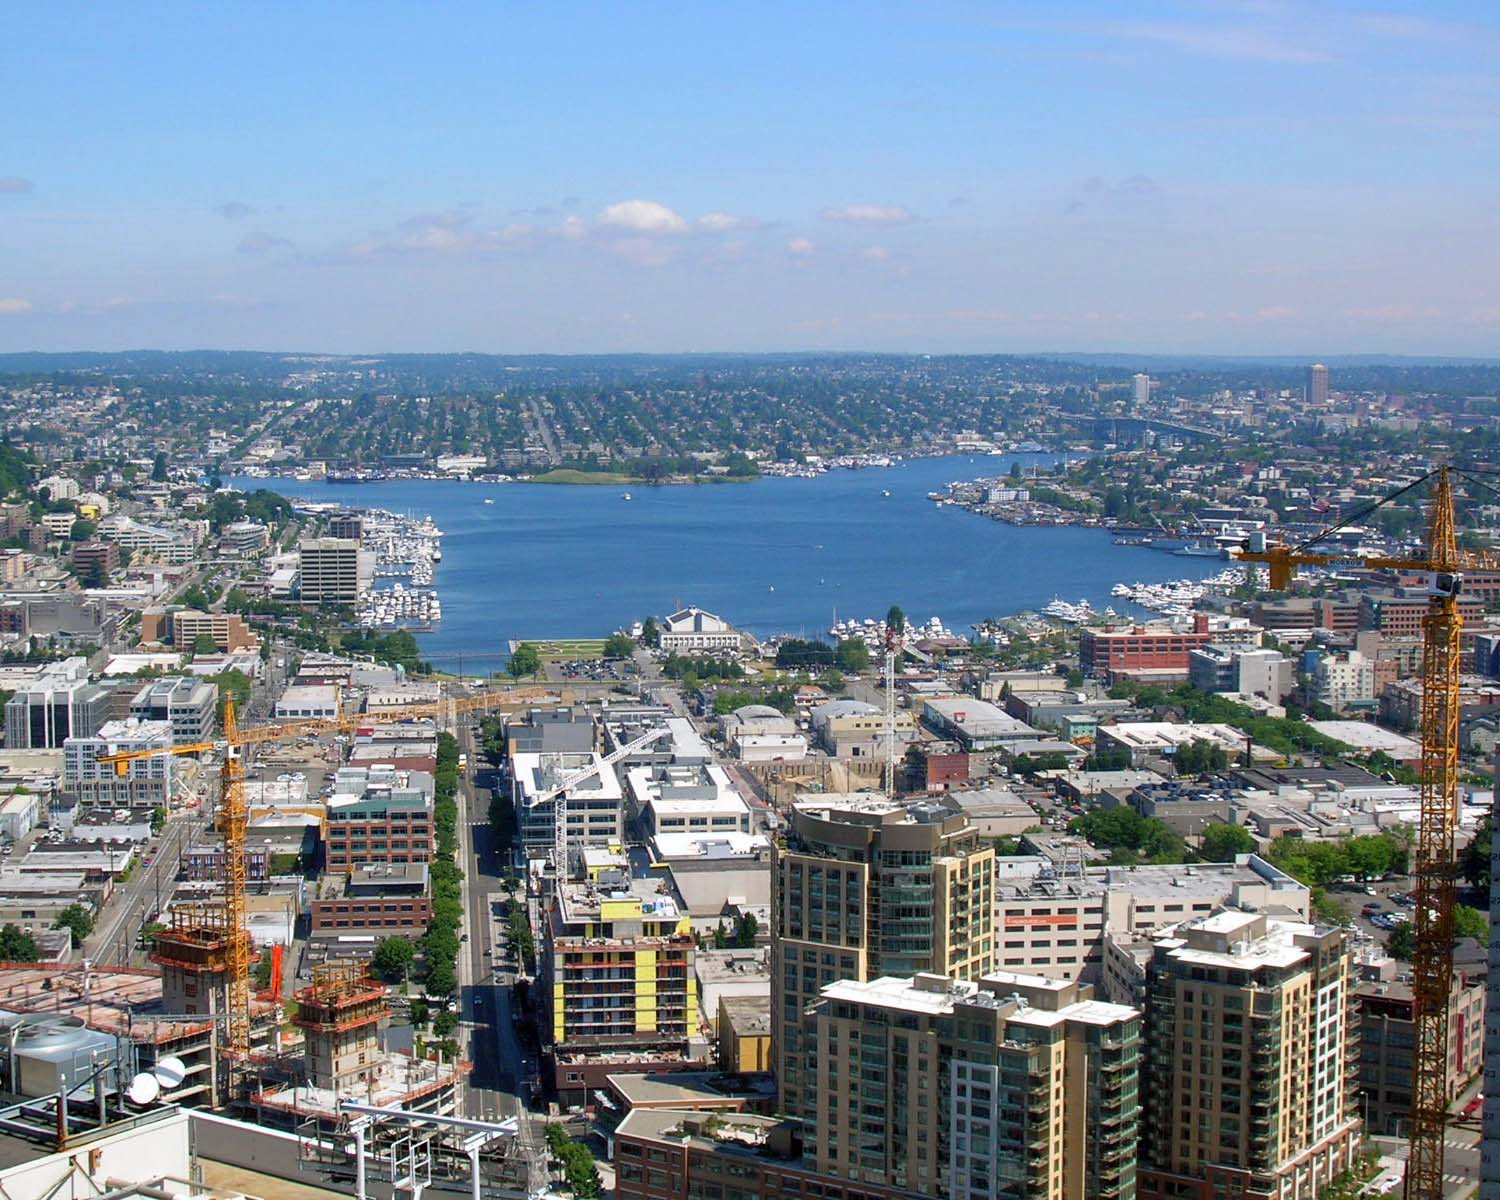 2008 aerial of South Lake Union